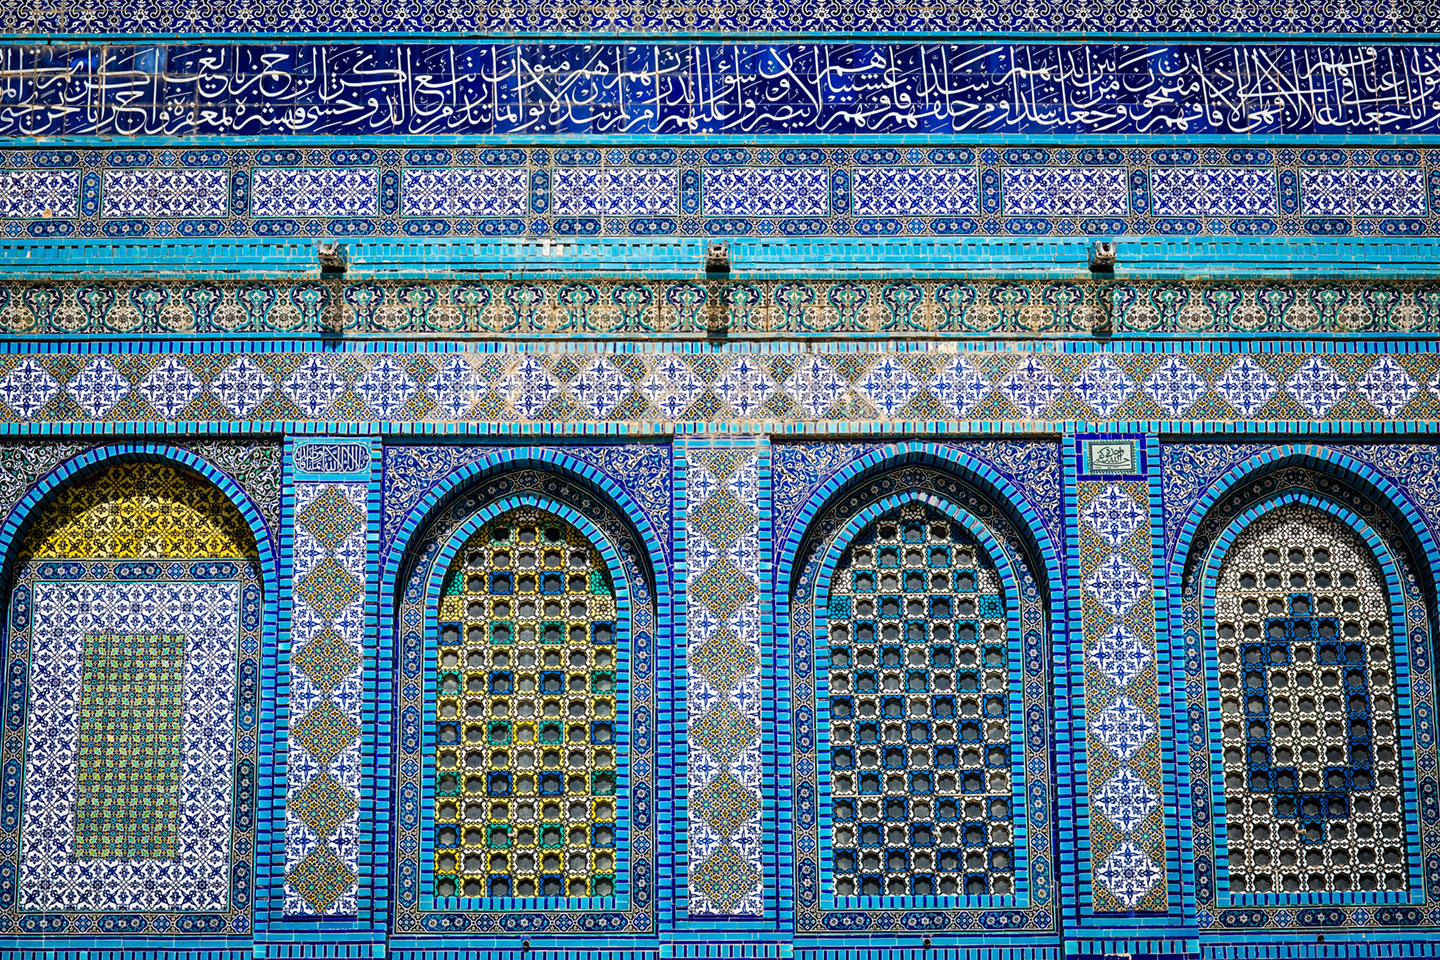 Azulejos tiles of the Dome of the Rock in Jerusalem, Israel